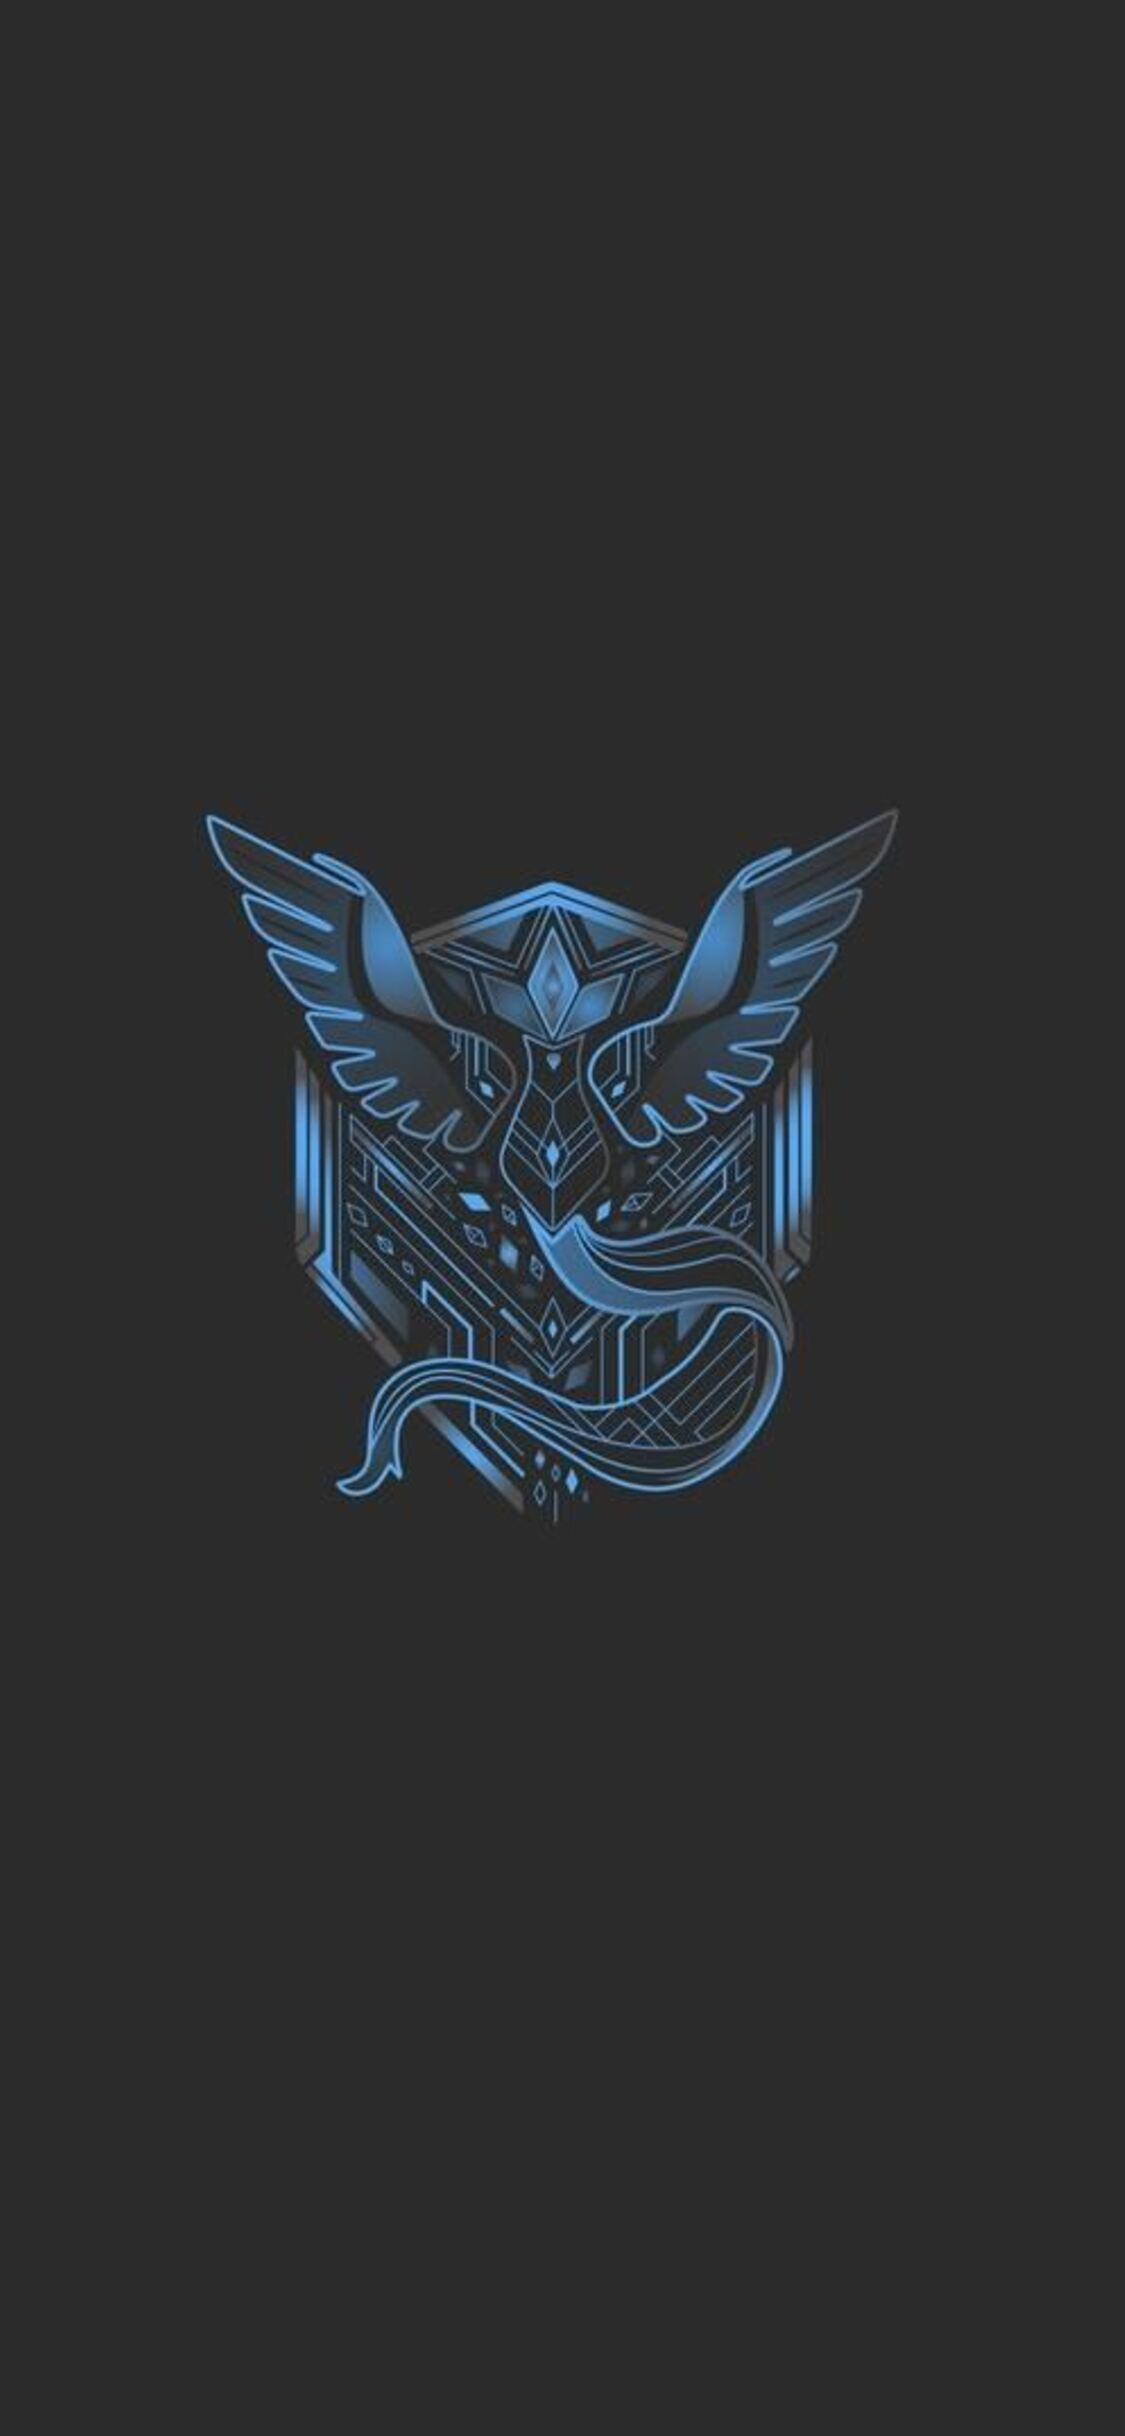 1125x2436 Team Mystic Minimalism Iphone XS,Iphone 10,Iphone X HD 4k Wallpapers, Images, Backgrounds, Photos and Pictures